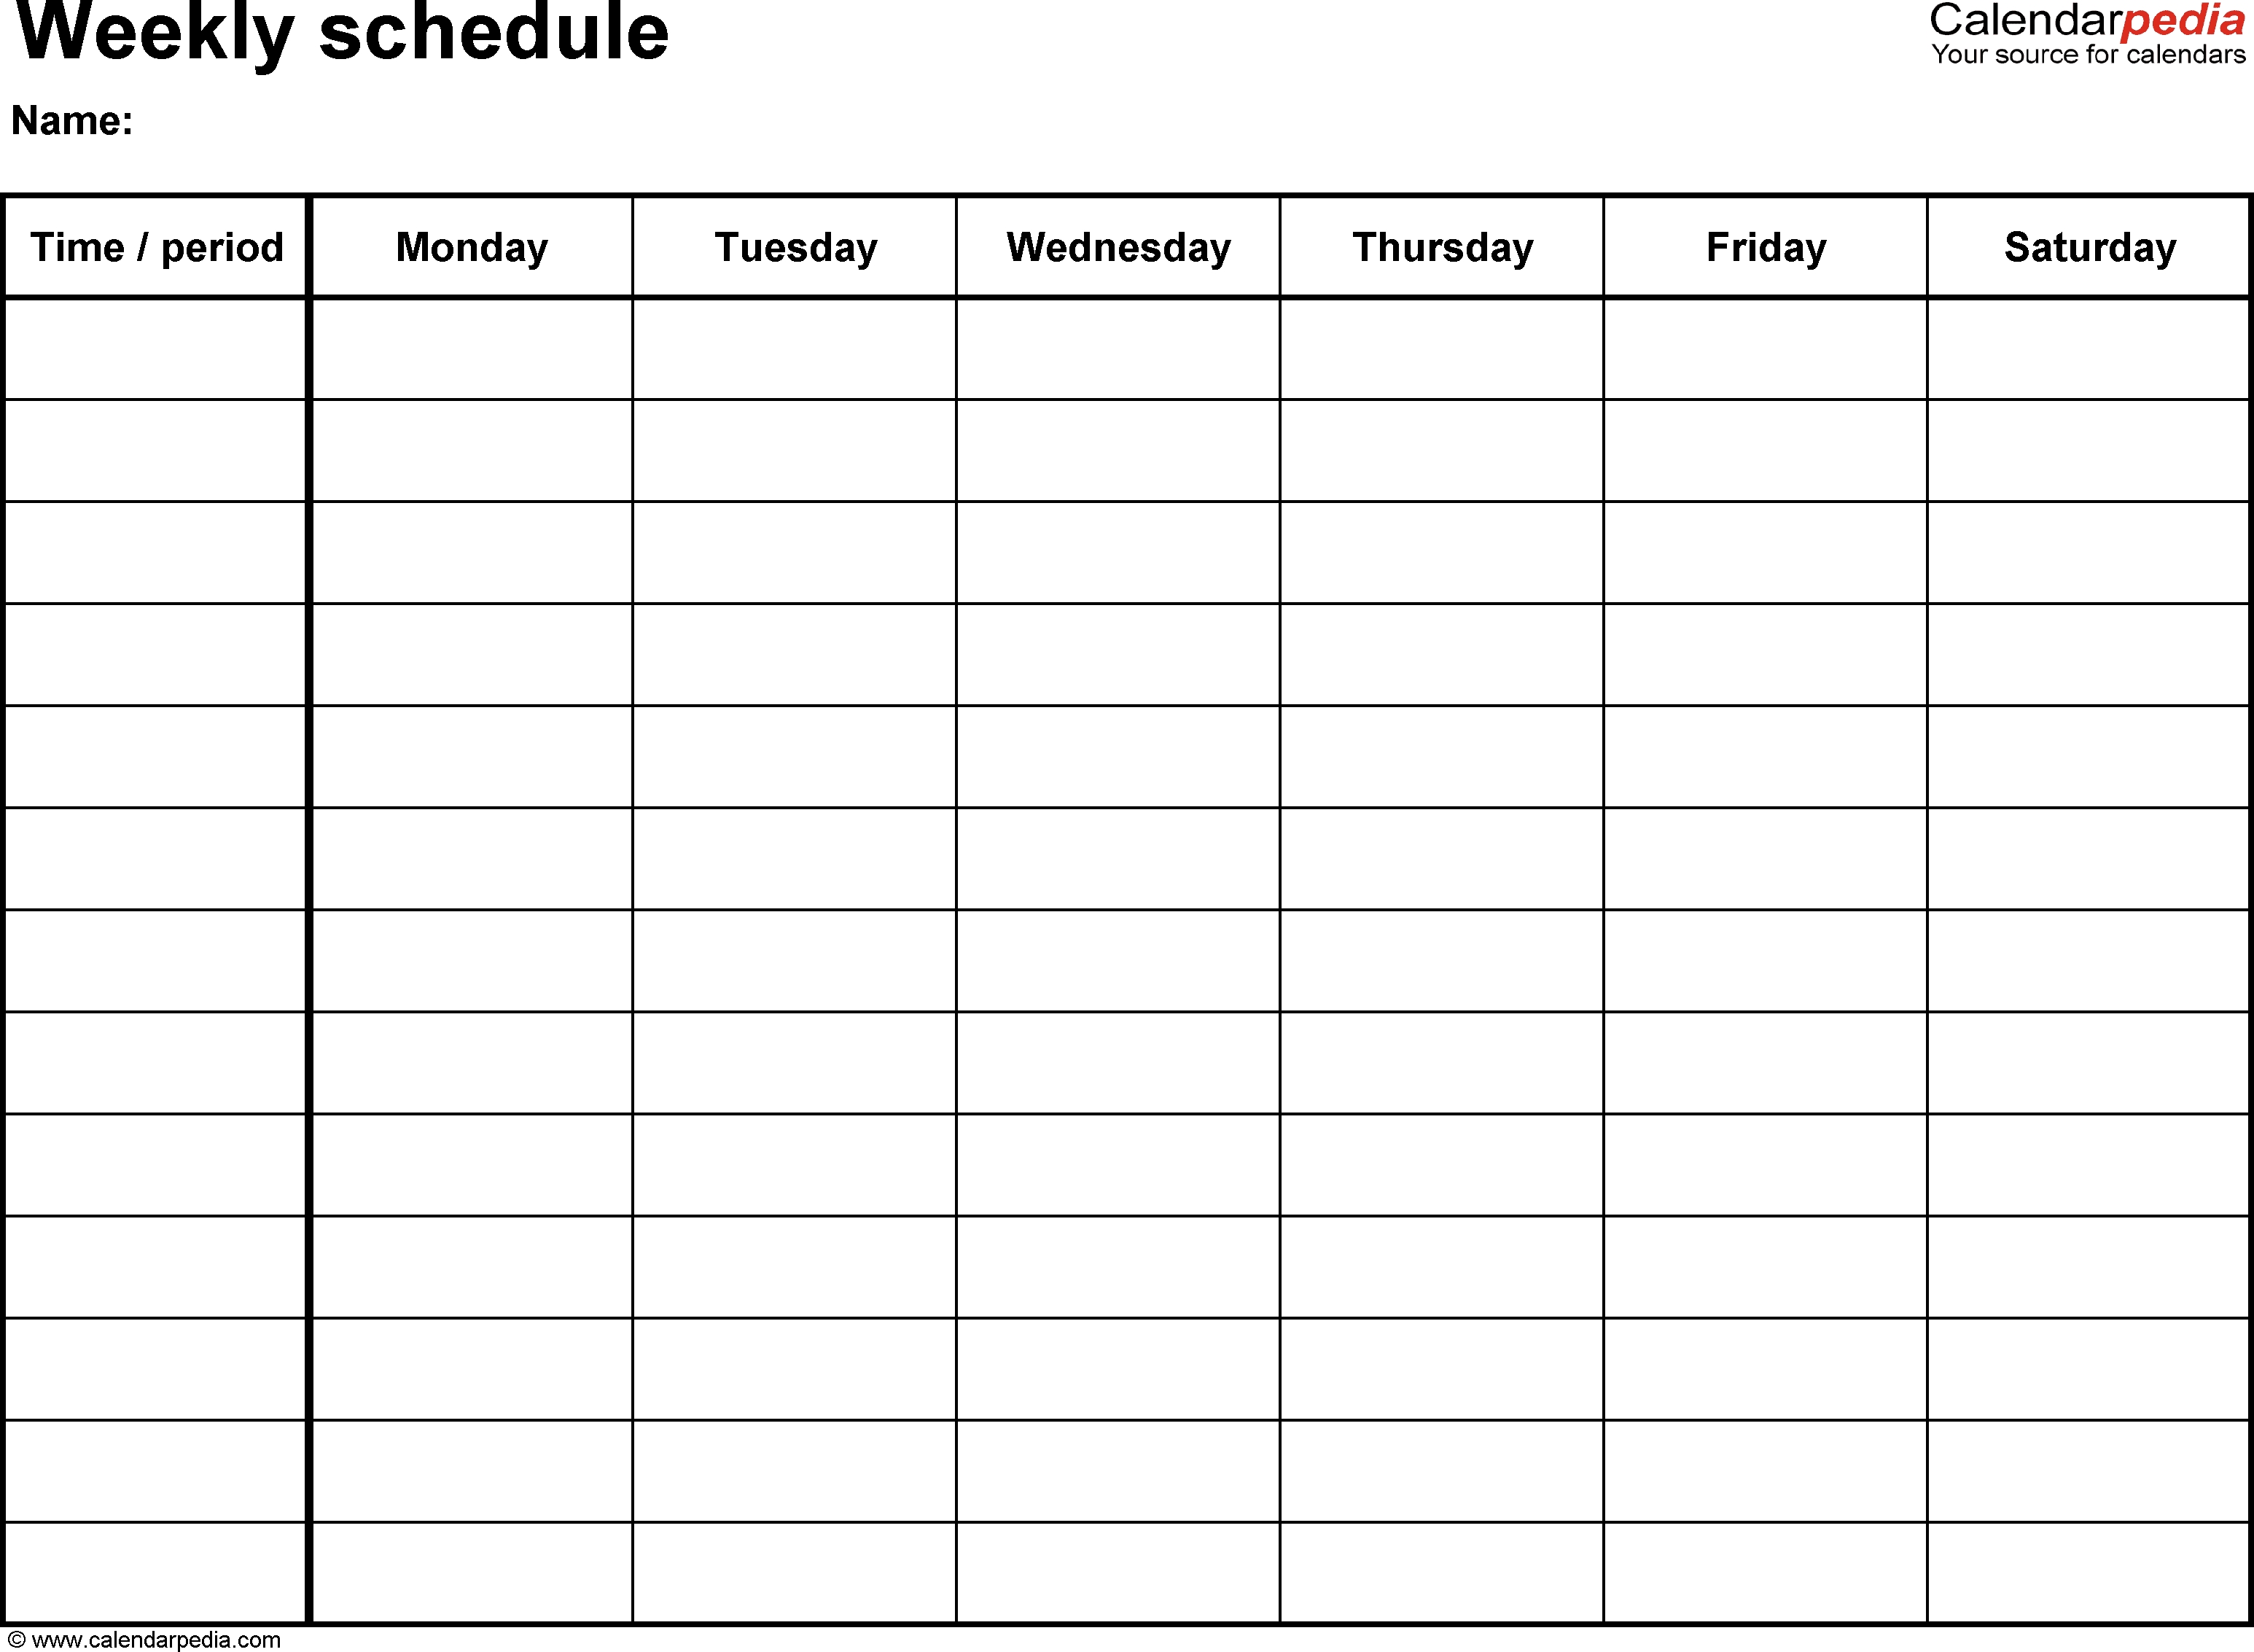 Weekly Schedule Template Monday Friday With Times - Firuse Extraordinary Monday Friday Calendar Template Printable